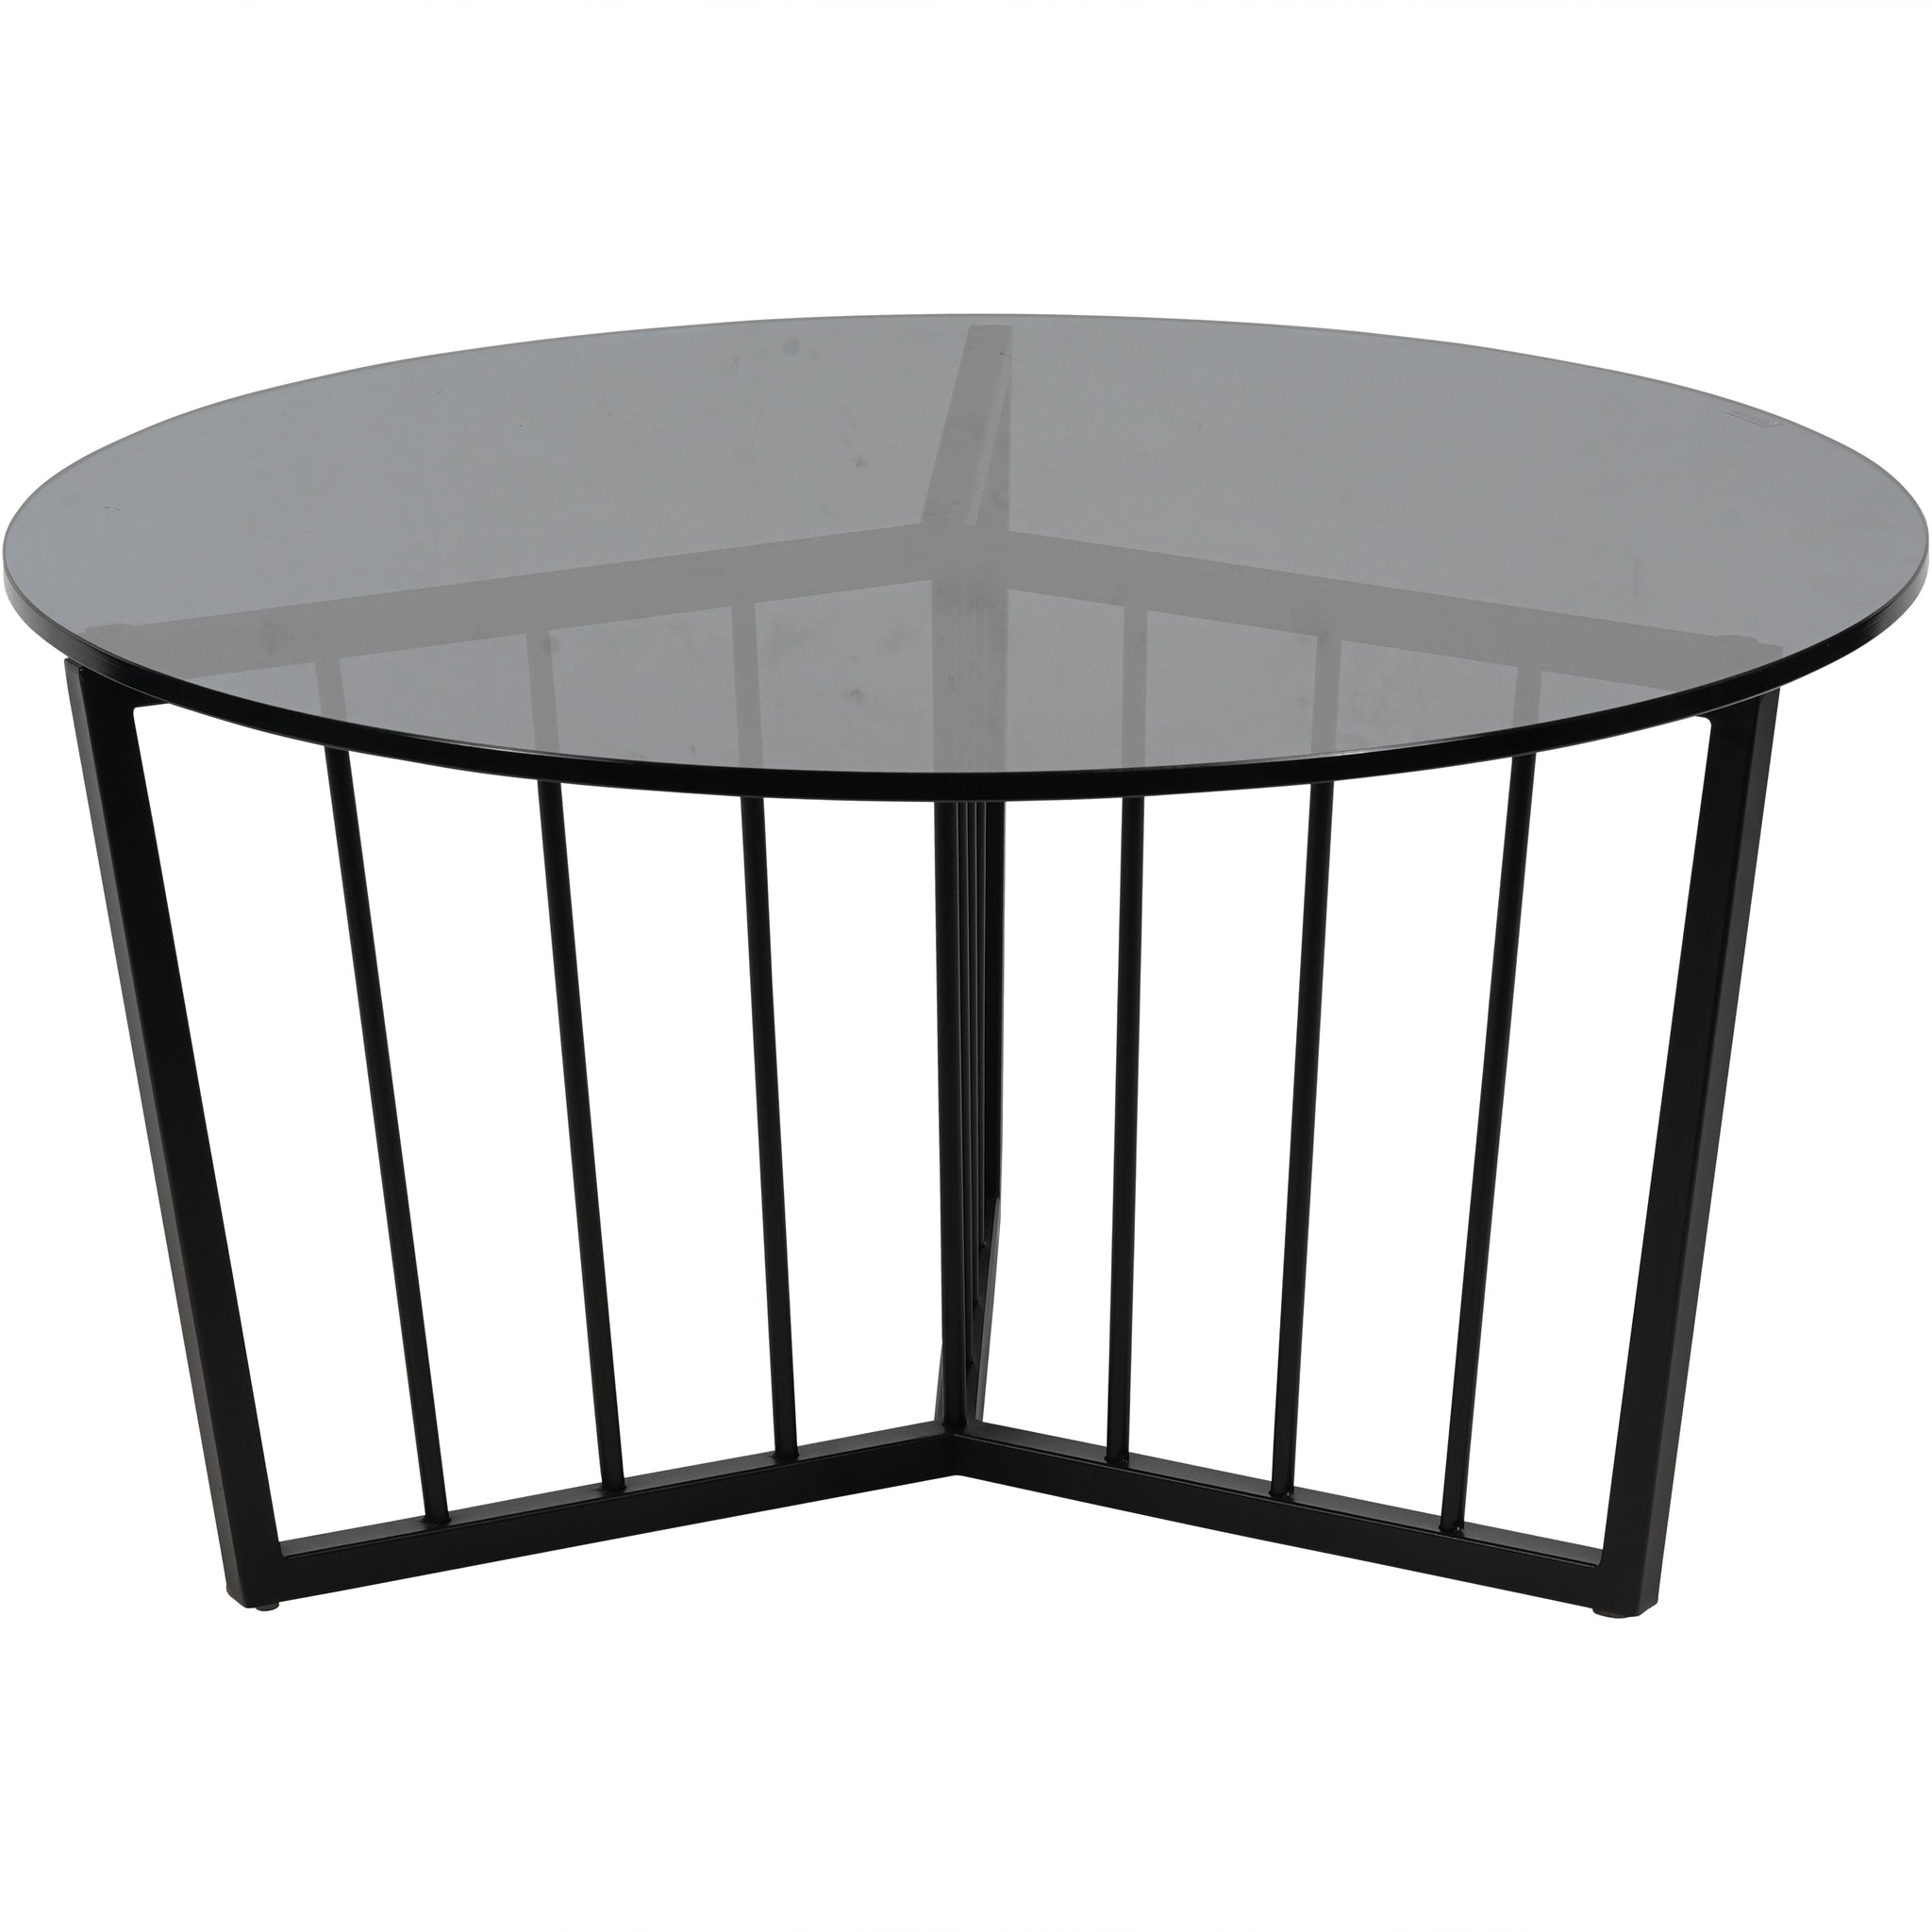 Alberta Black Frame and Tinted Glass Round Coffee Table 80cm